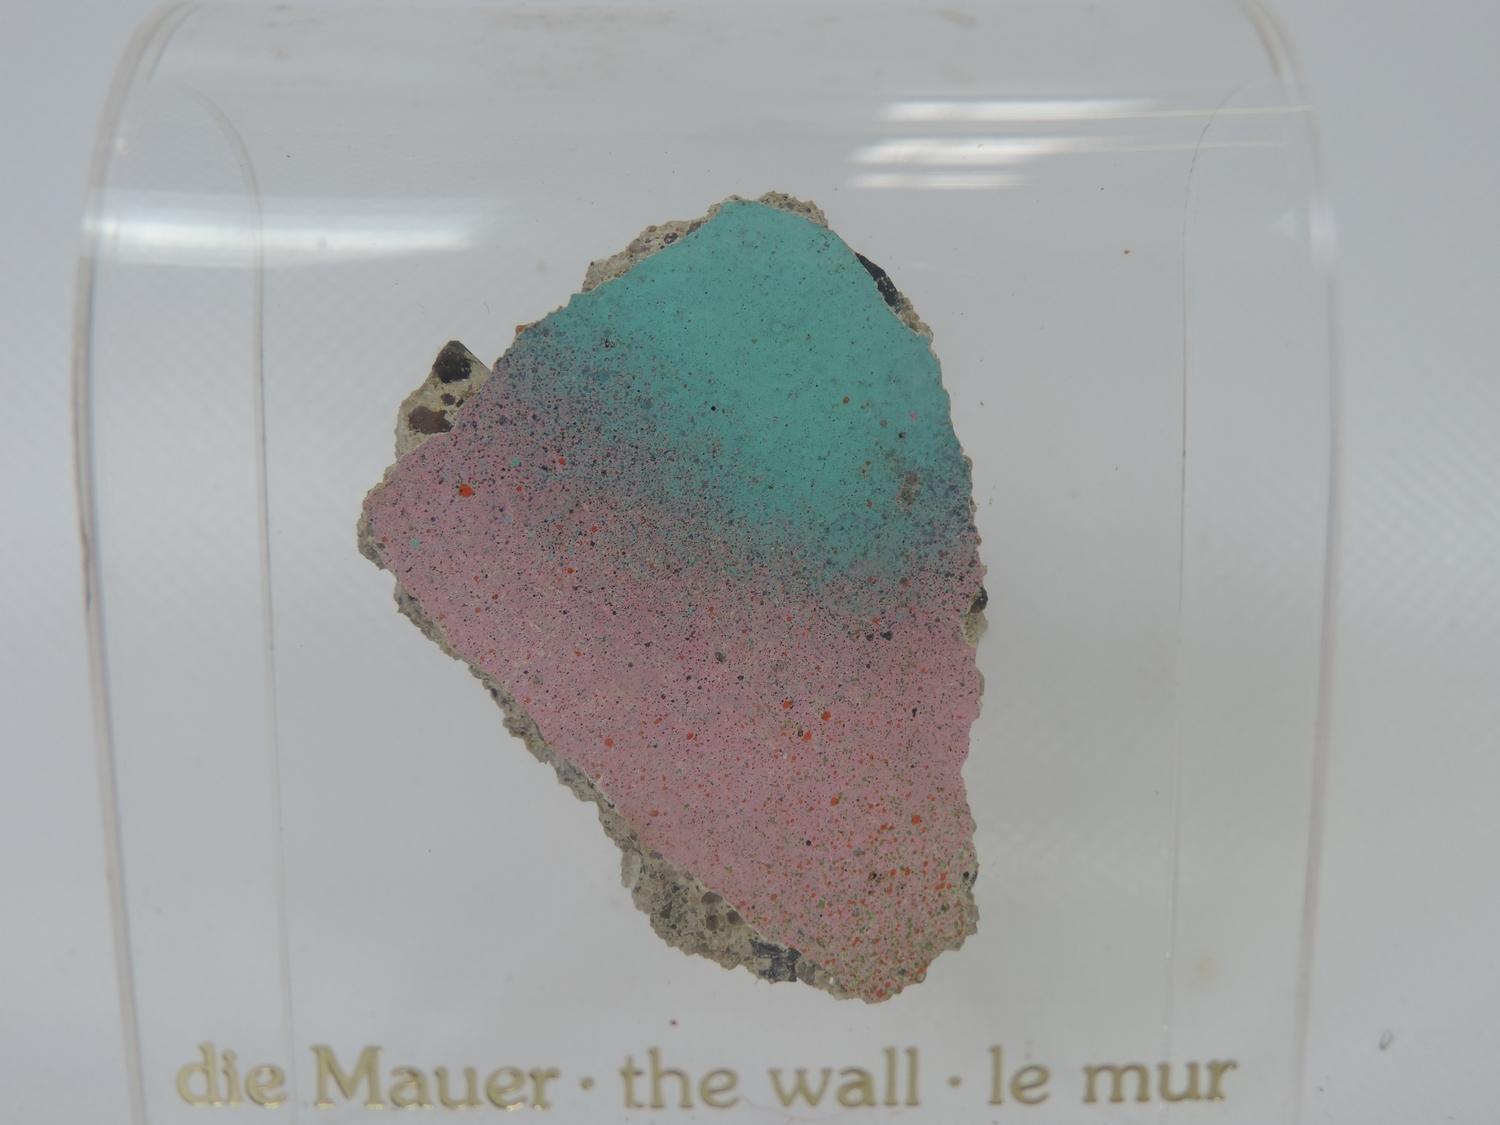 Mounted Souvenir of Berlin Wall - Image 2 of 3